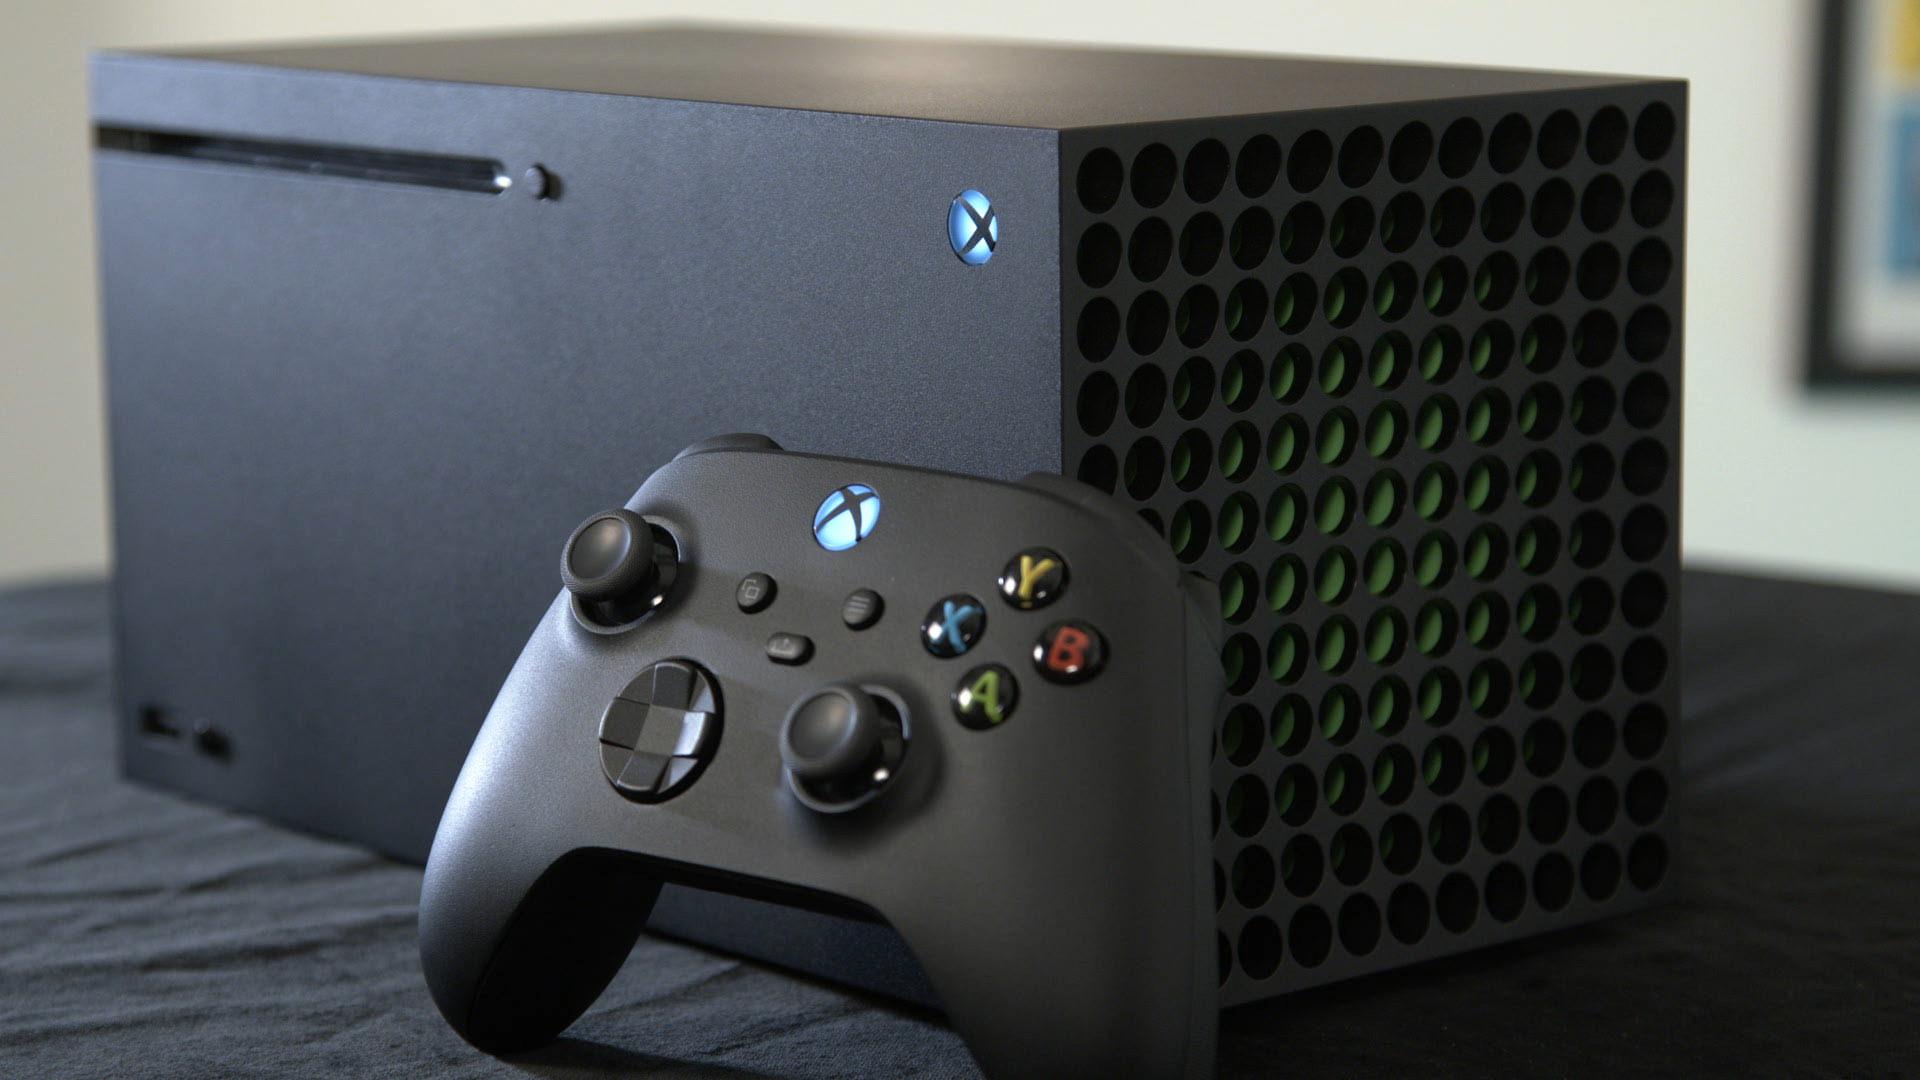 Xbox: Series X controller in a default color, Featuring a slightly smaller body and a “Share” button. 1920x1080 Full HD Wallpaper.